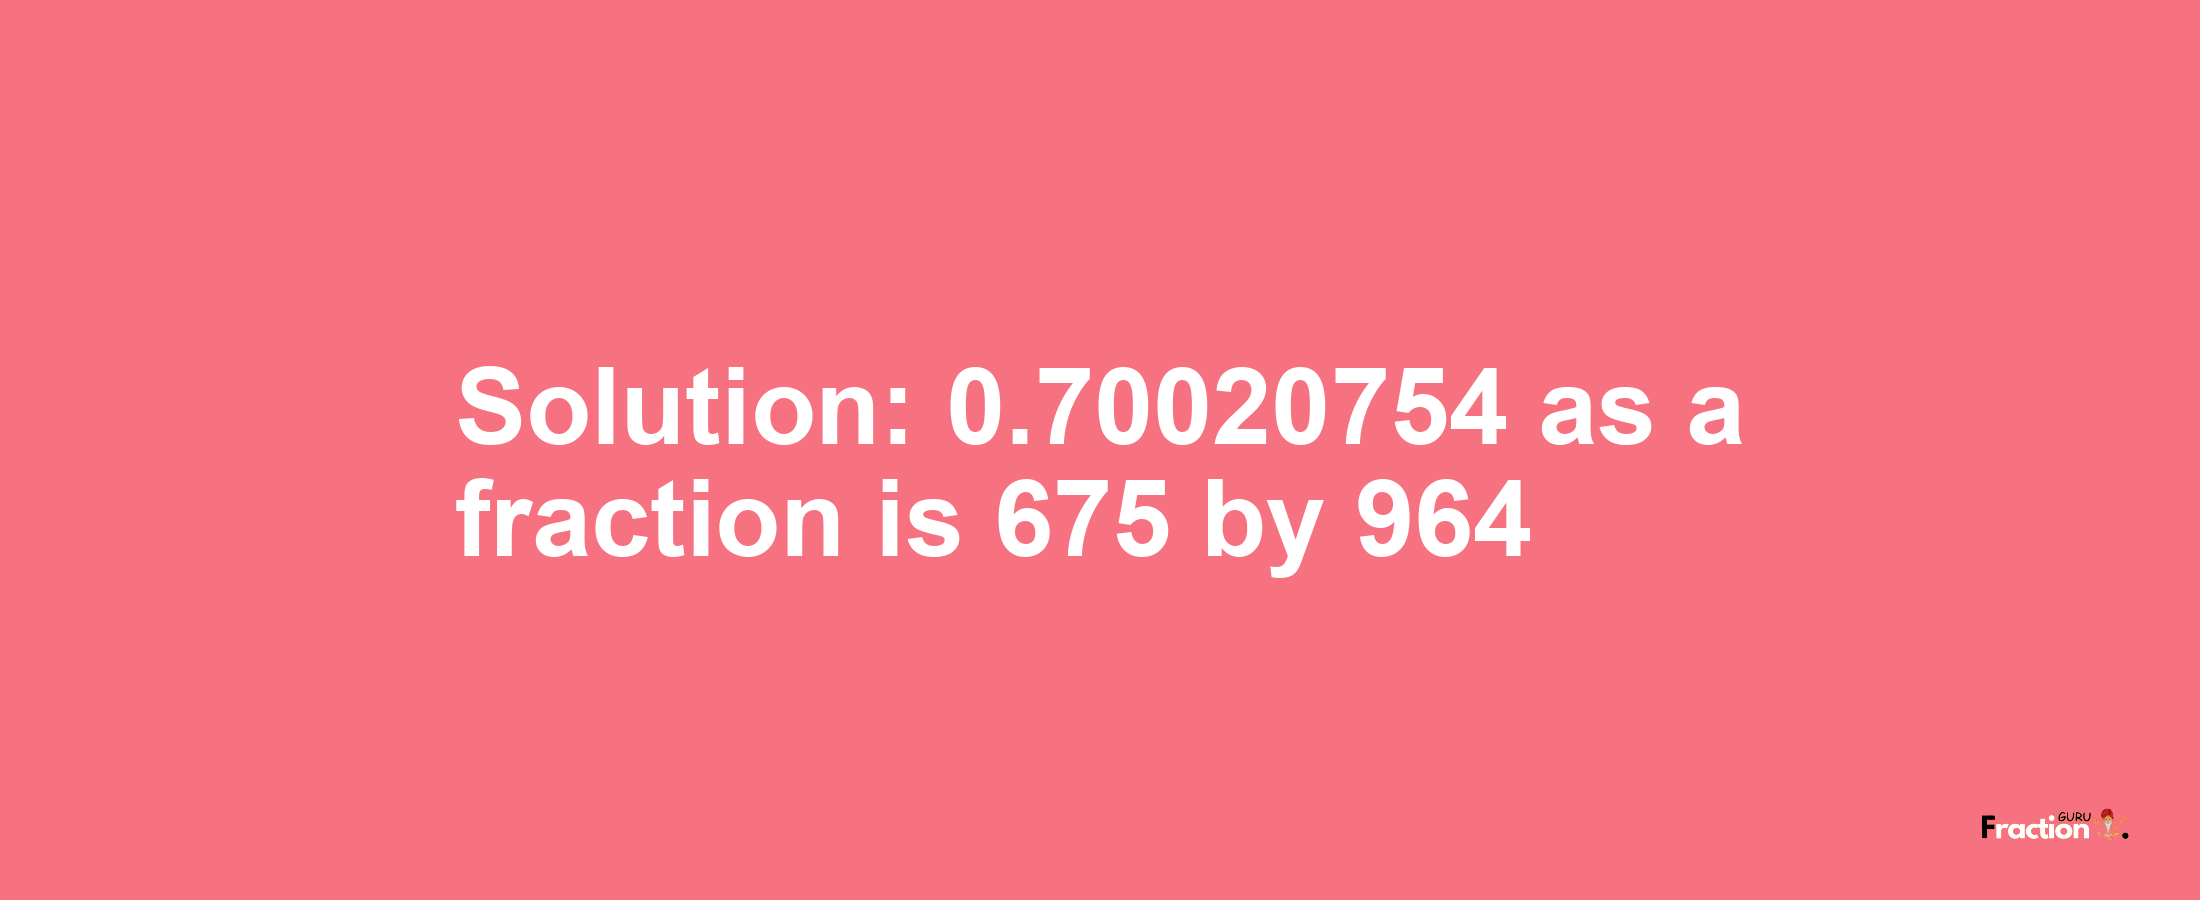 Solution:0.70020754 as a fraction is 675/964